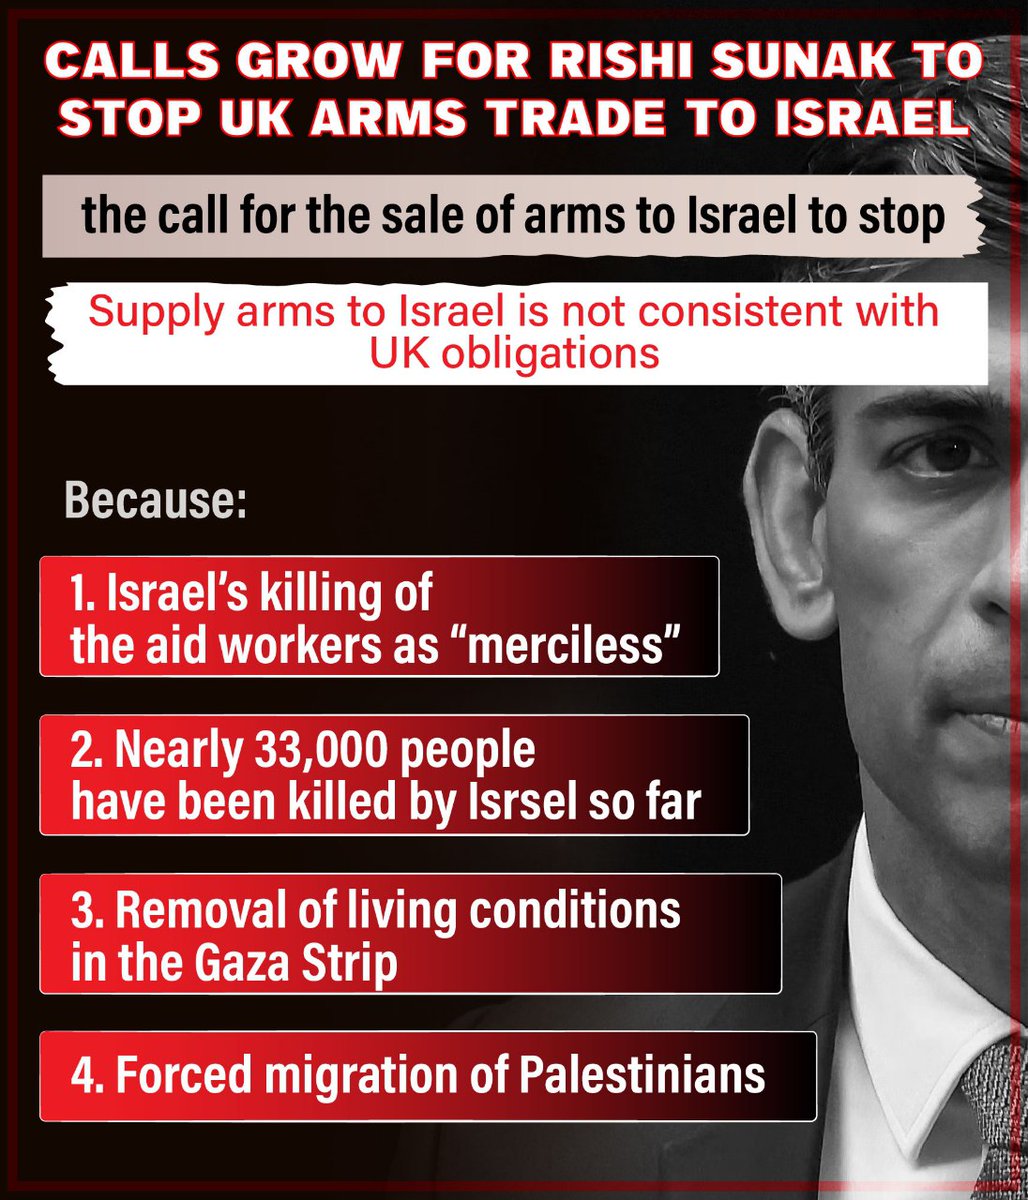 CALLS GROW FOR RISHI SUNAK TO STOP UK ARMS TRADE TO ISRAEL. #BDSMovement #SunakOut